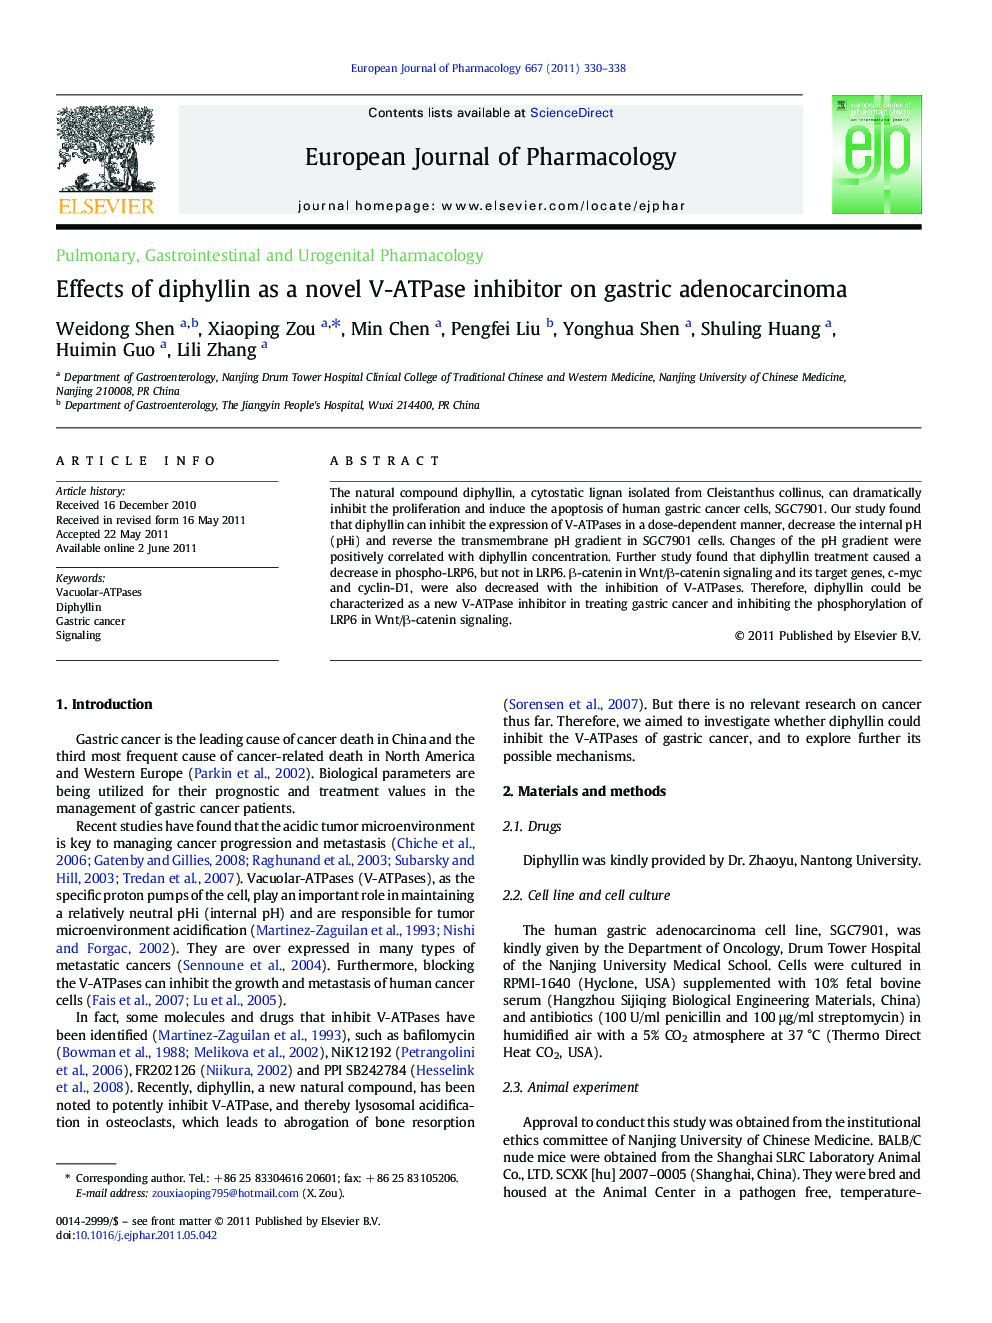 Effects of diphyllin as a novel V-ATPase inhibitor on gastric adenocarcinoma